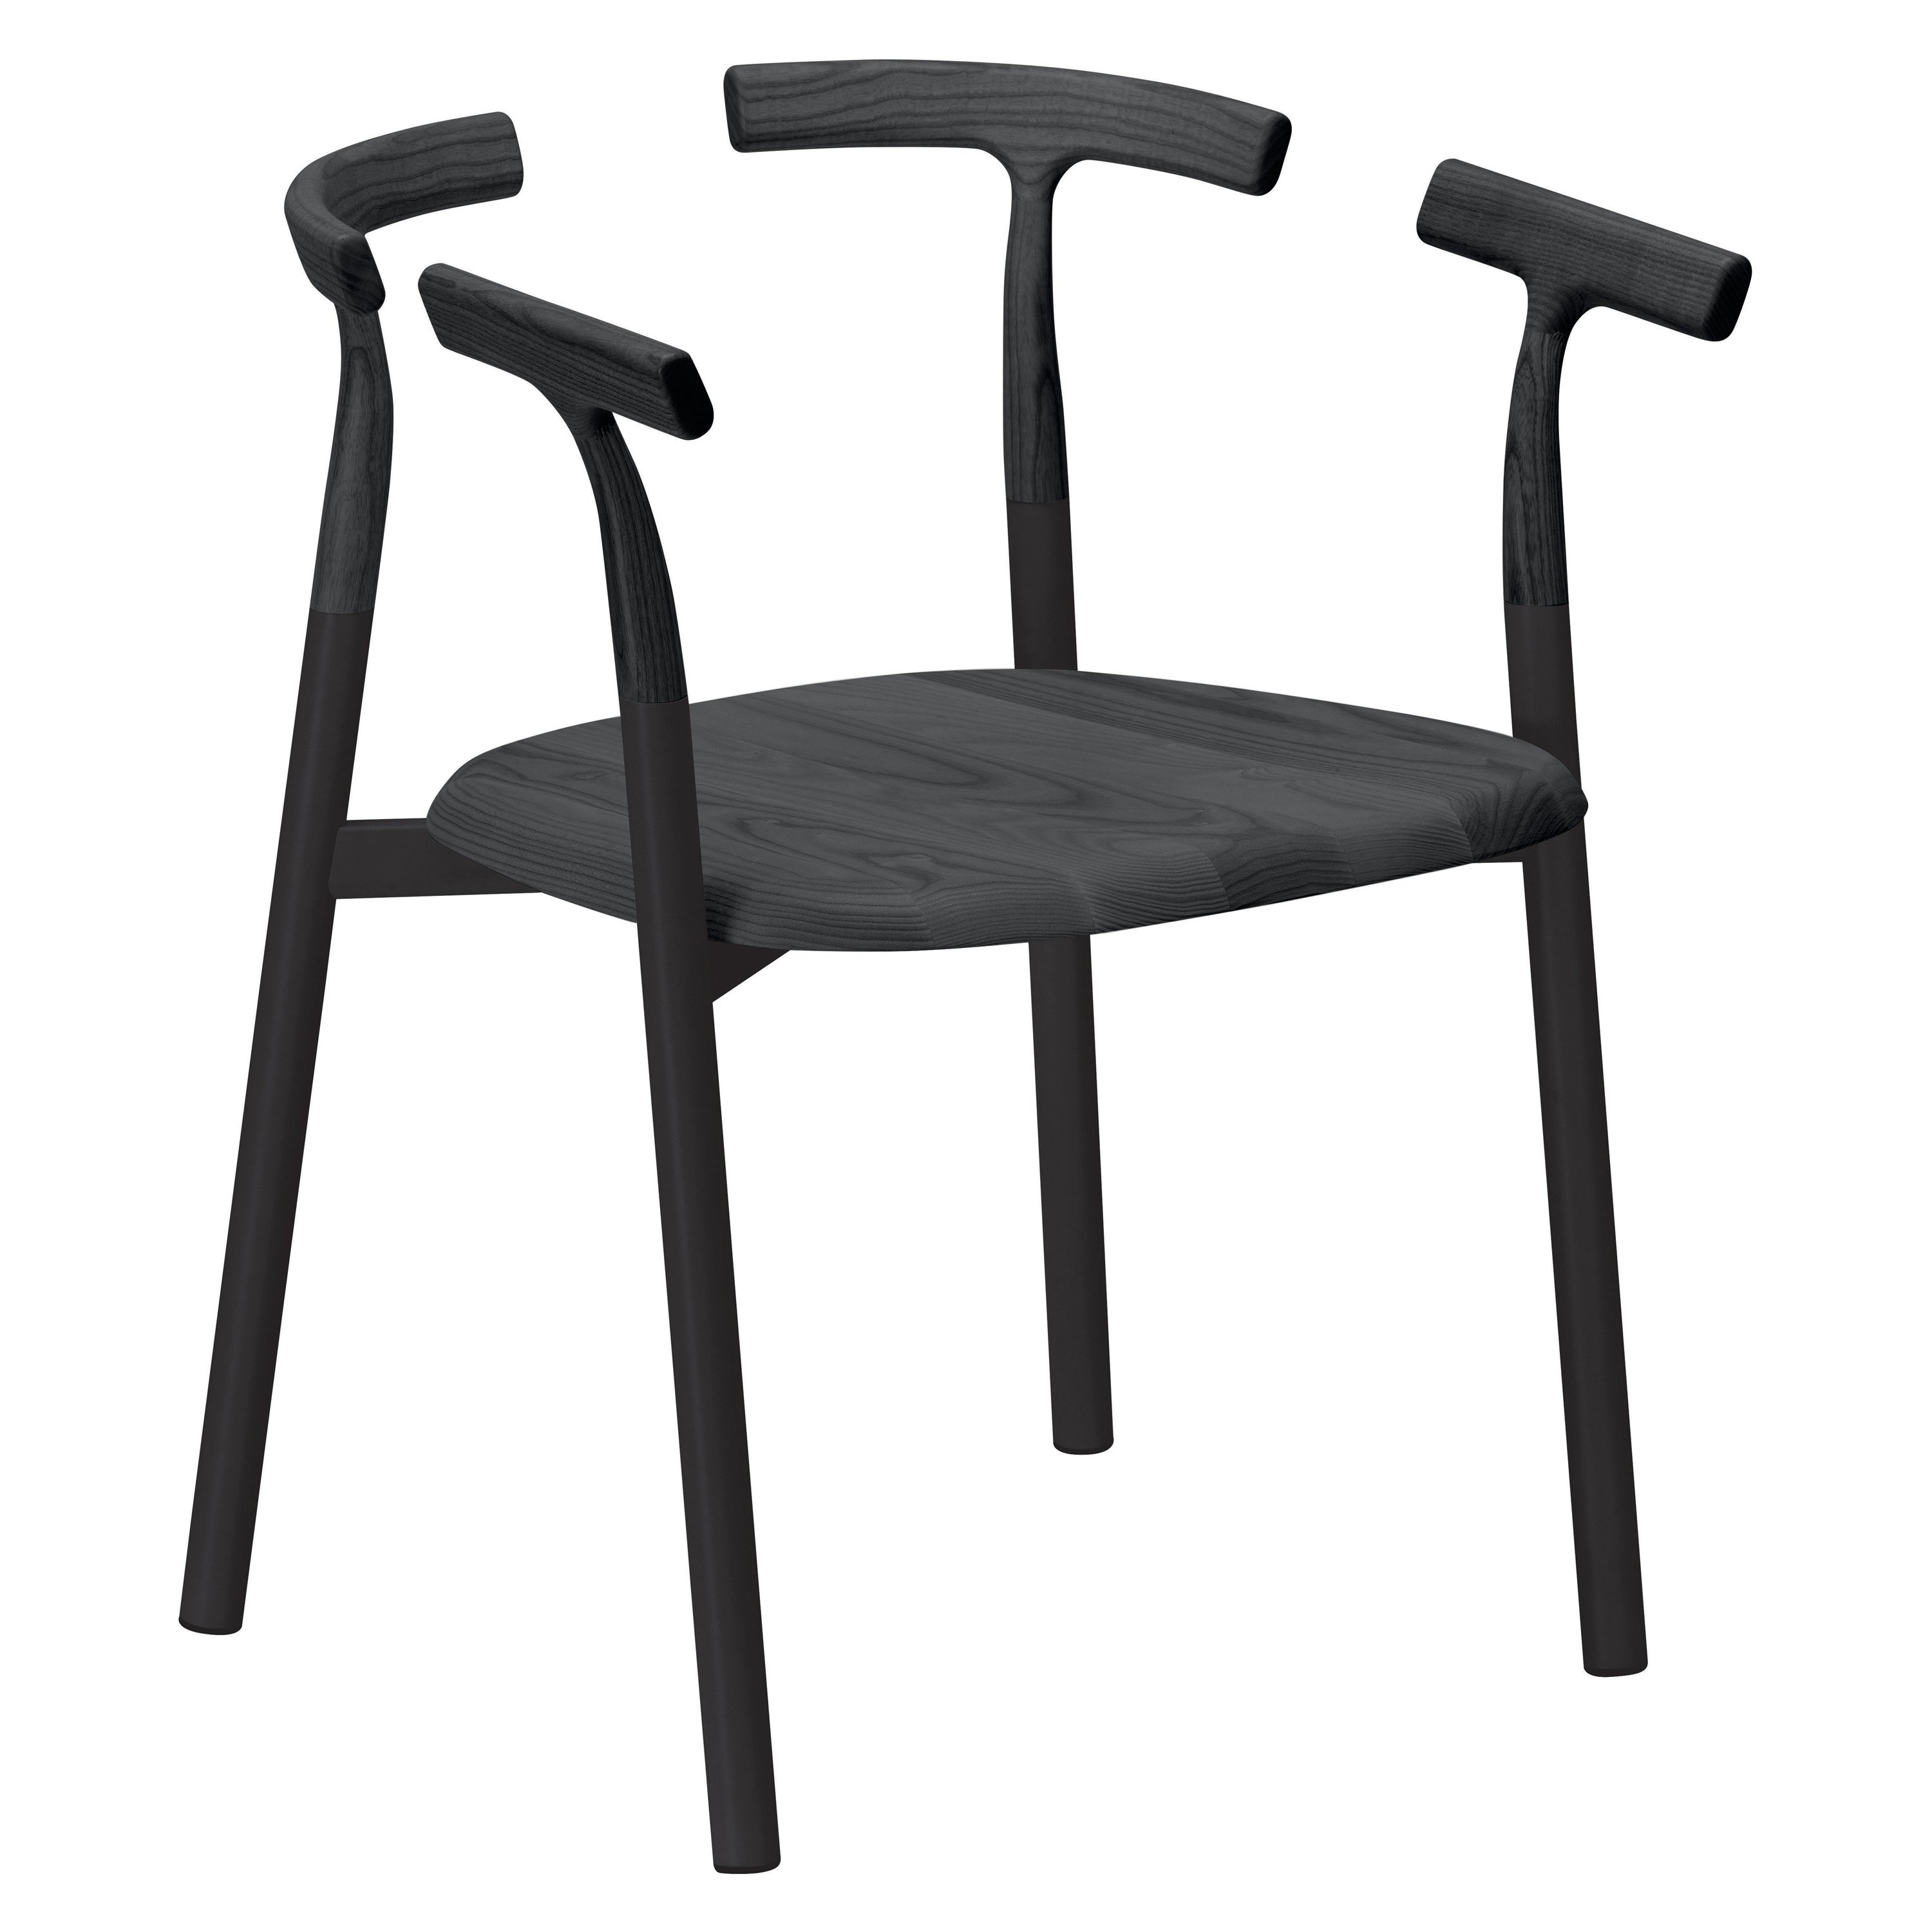 Alias 10C Twig 4 Chair in Ash Black Stained Seat with Black Lacquered Frame